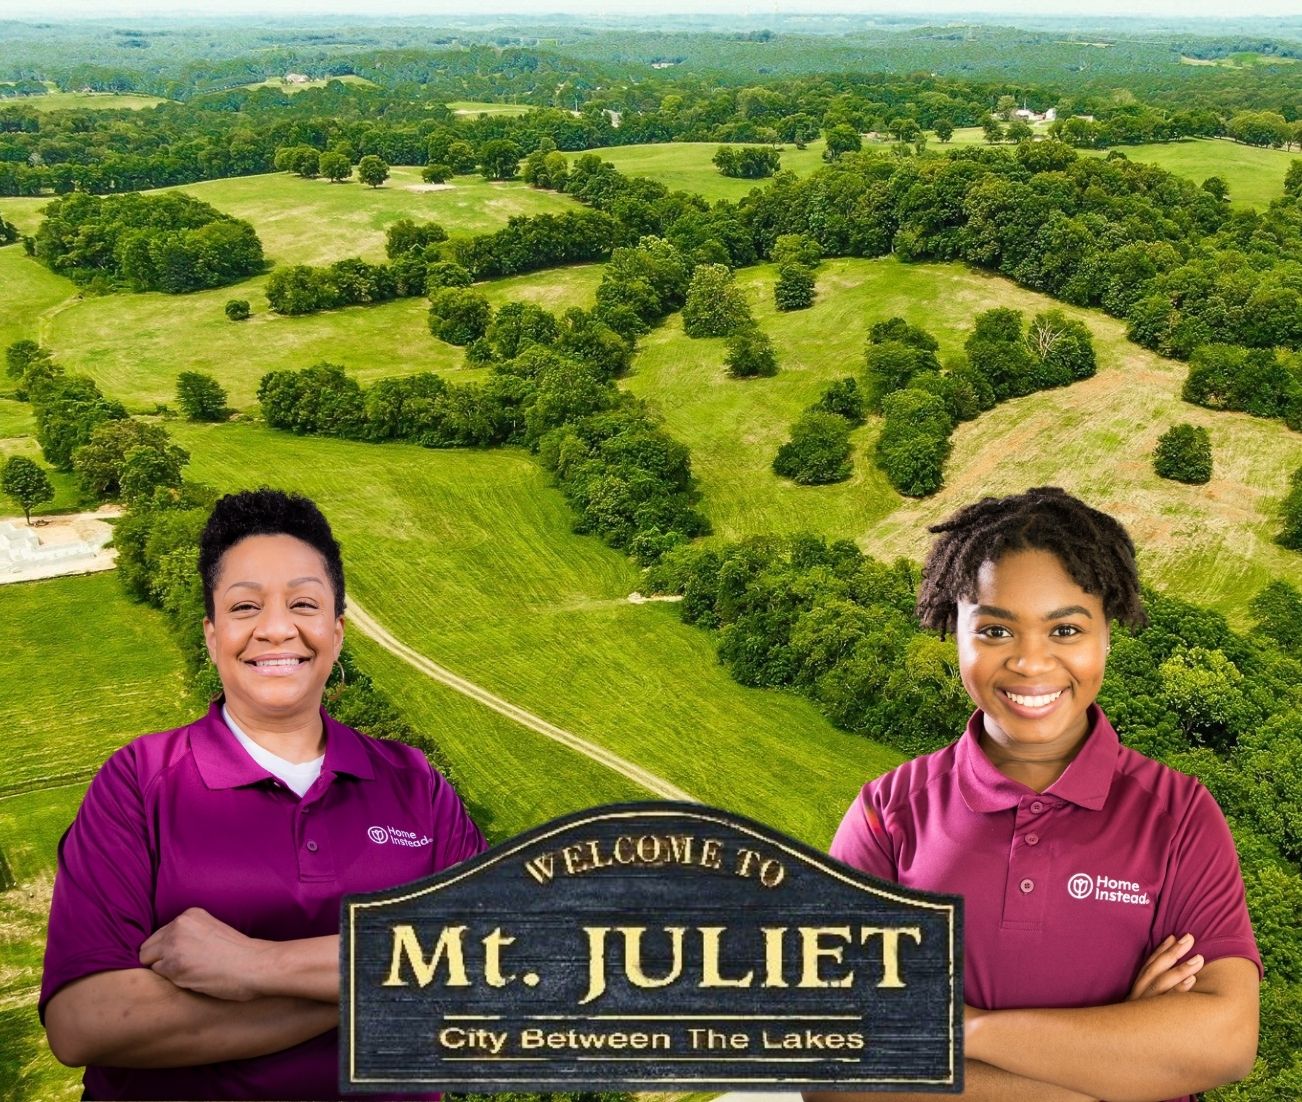 Home Care Services in Mt. Juliet, TN provided by Home instead